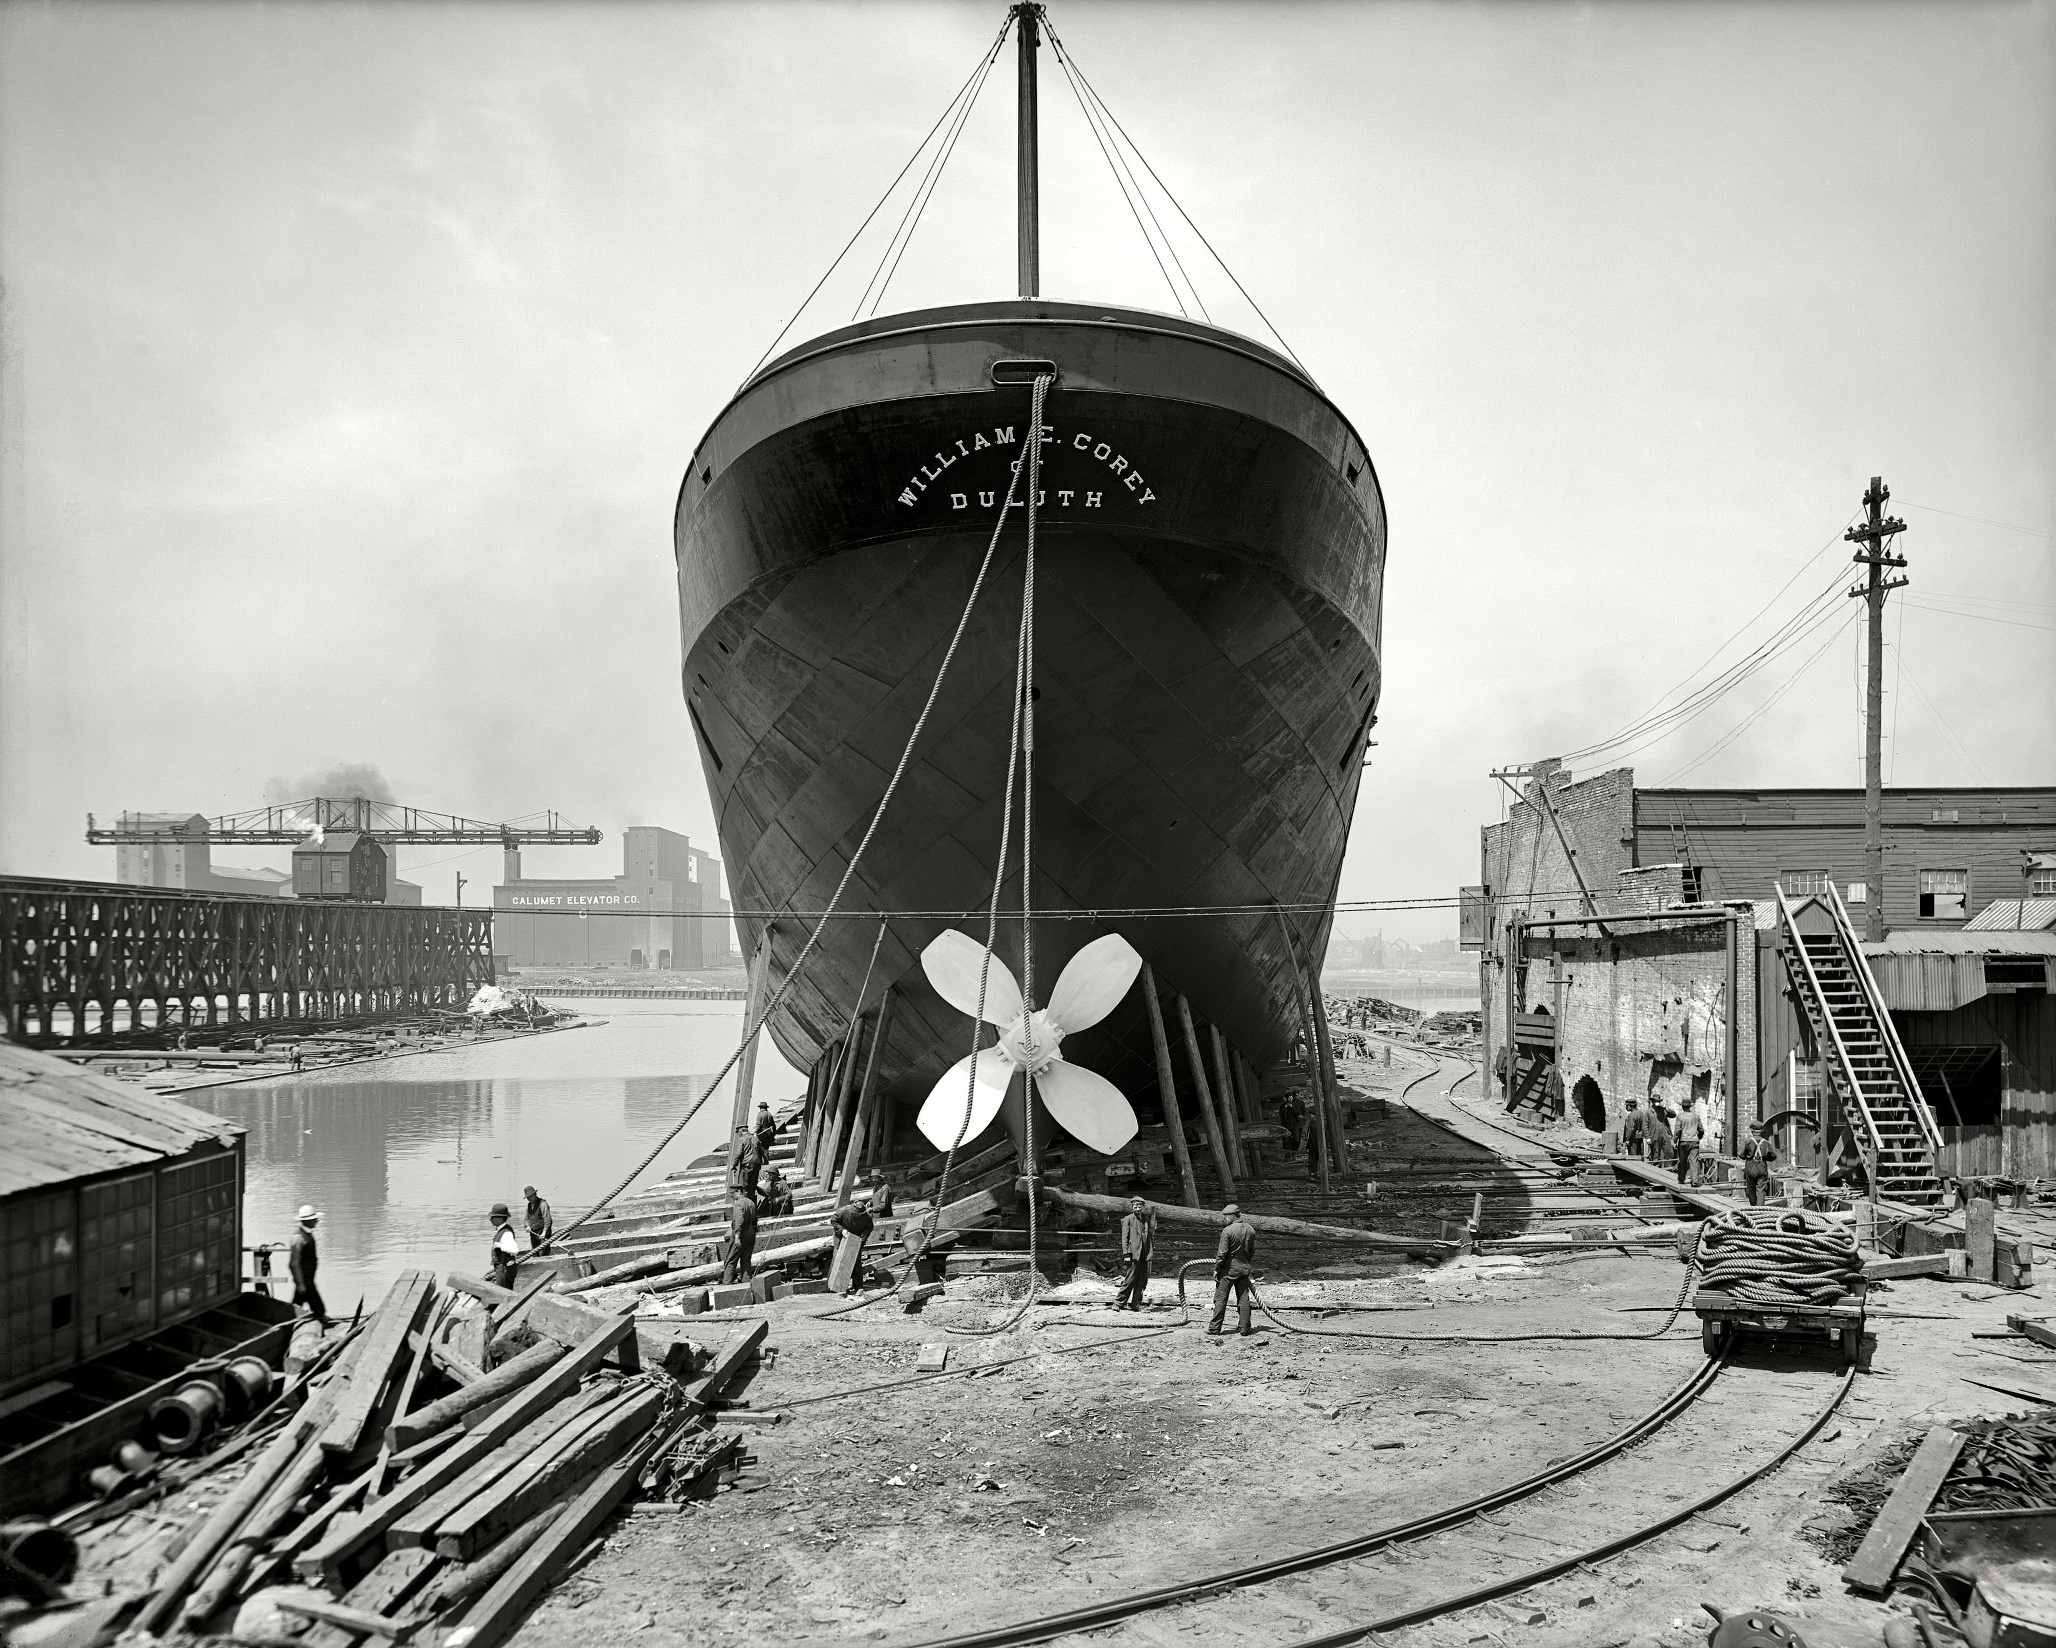 Steamer William E. Corey, stern view on the ways, South Chicago, 1905